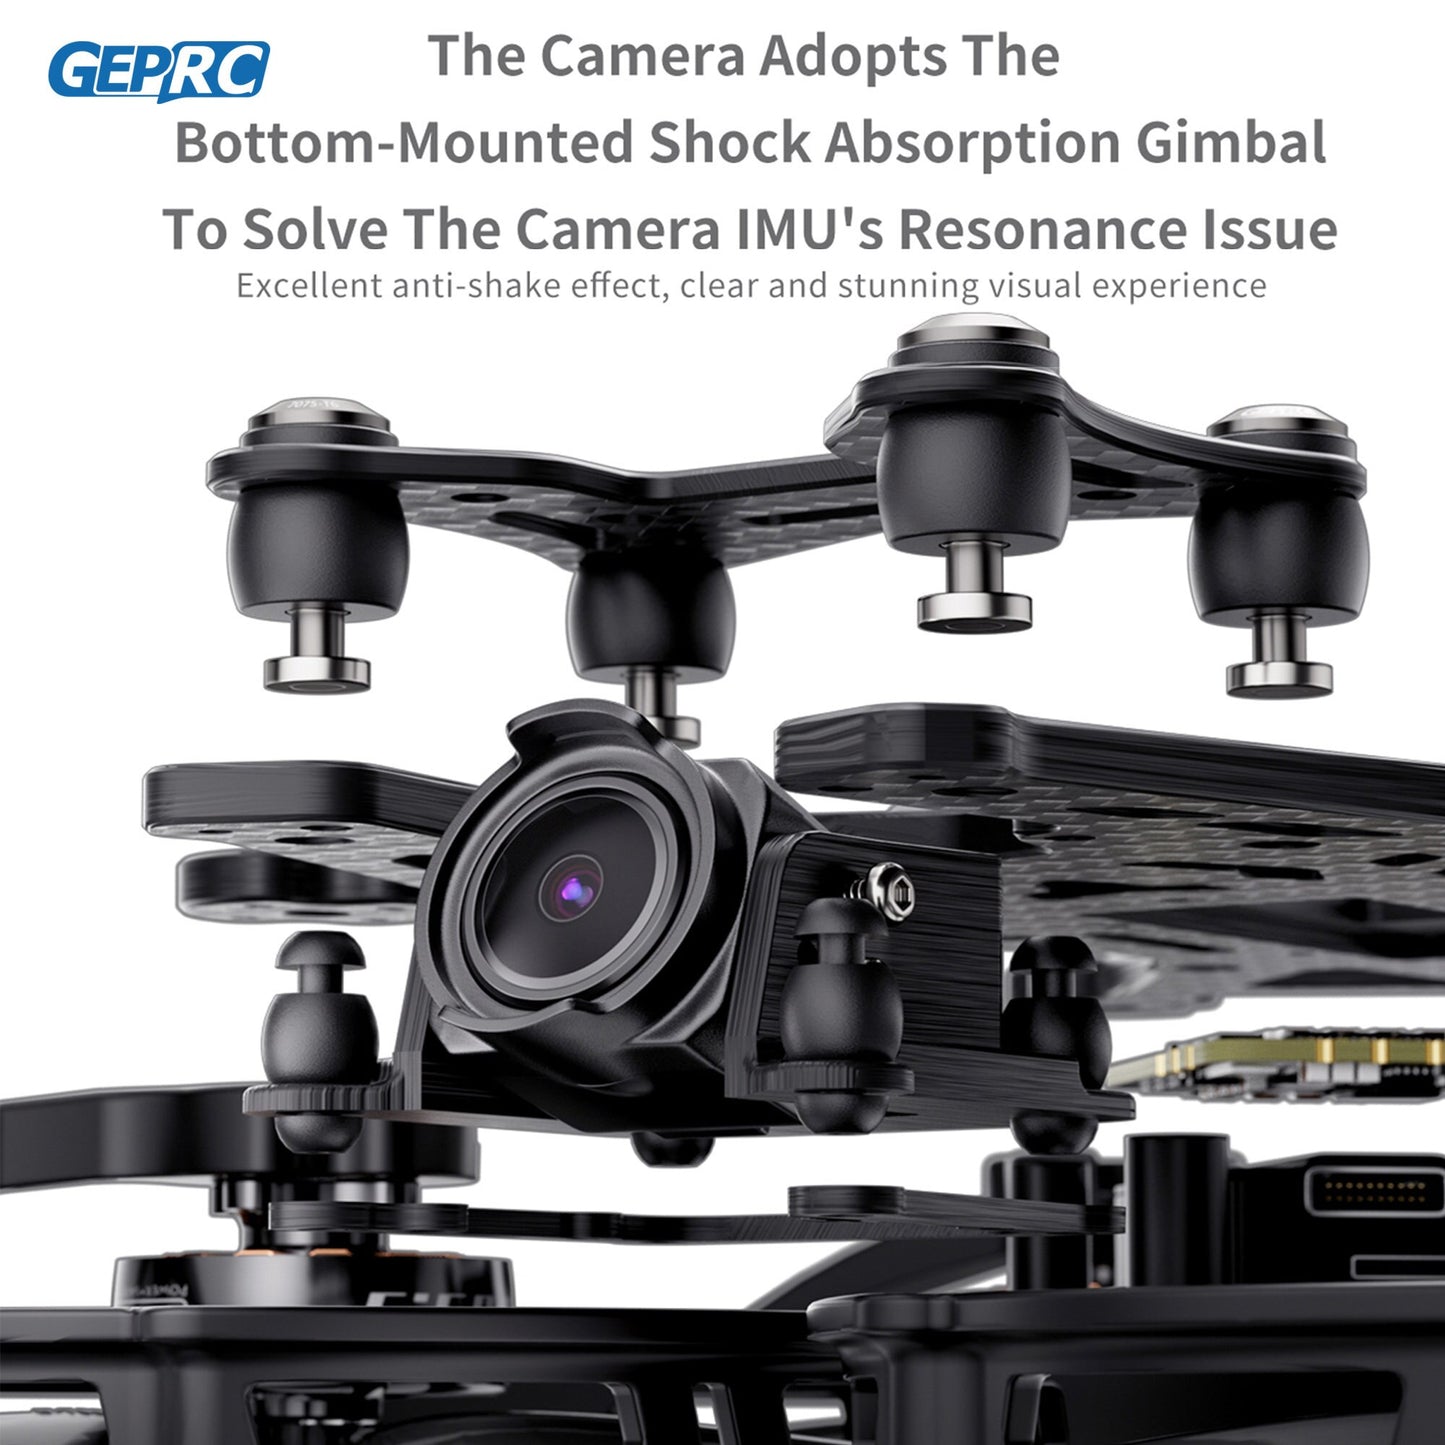 GEPRC CineLog35 V2 HD, GEPRC The Camera Adopts The Bottom-Mounted Shock Absorption